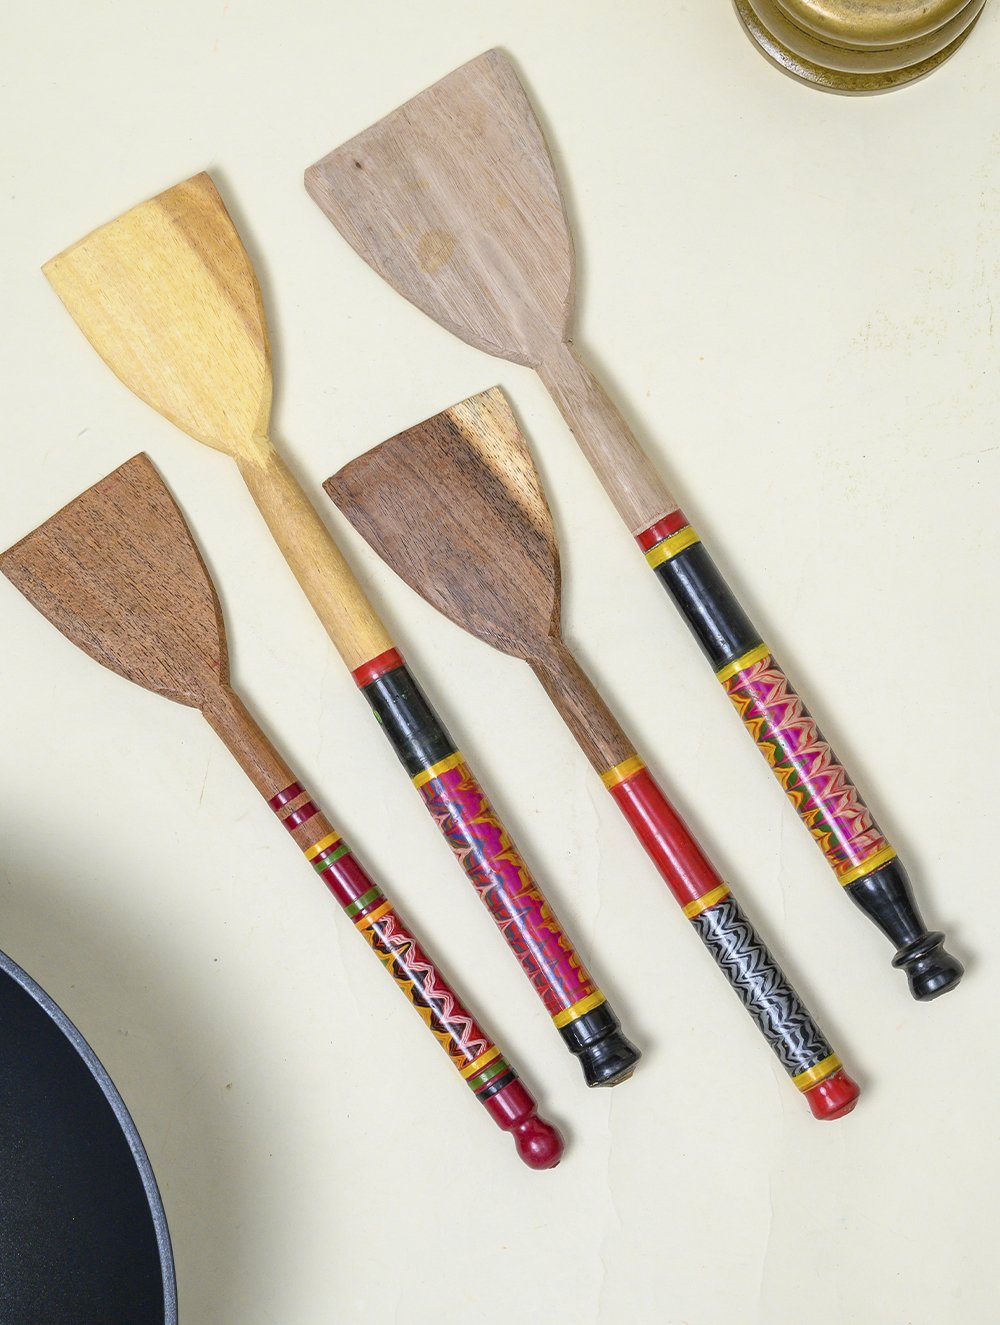 Load image into Gallery viewer, Kutch Lacquer Craft Wooden Spoons &amp; Ladles (Set of 4)